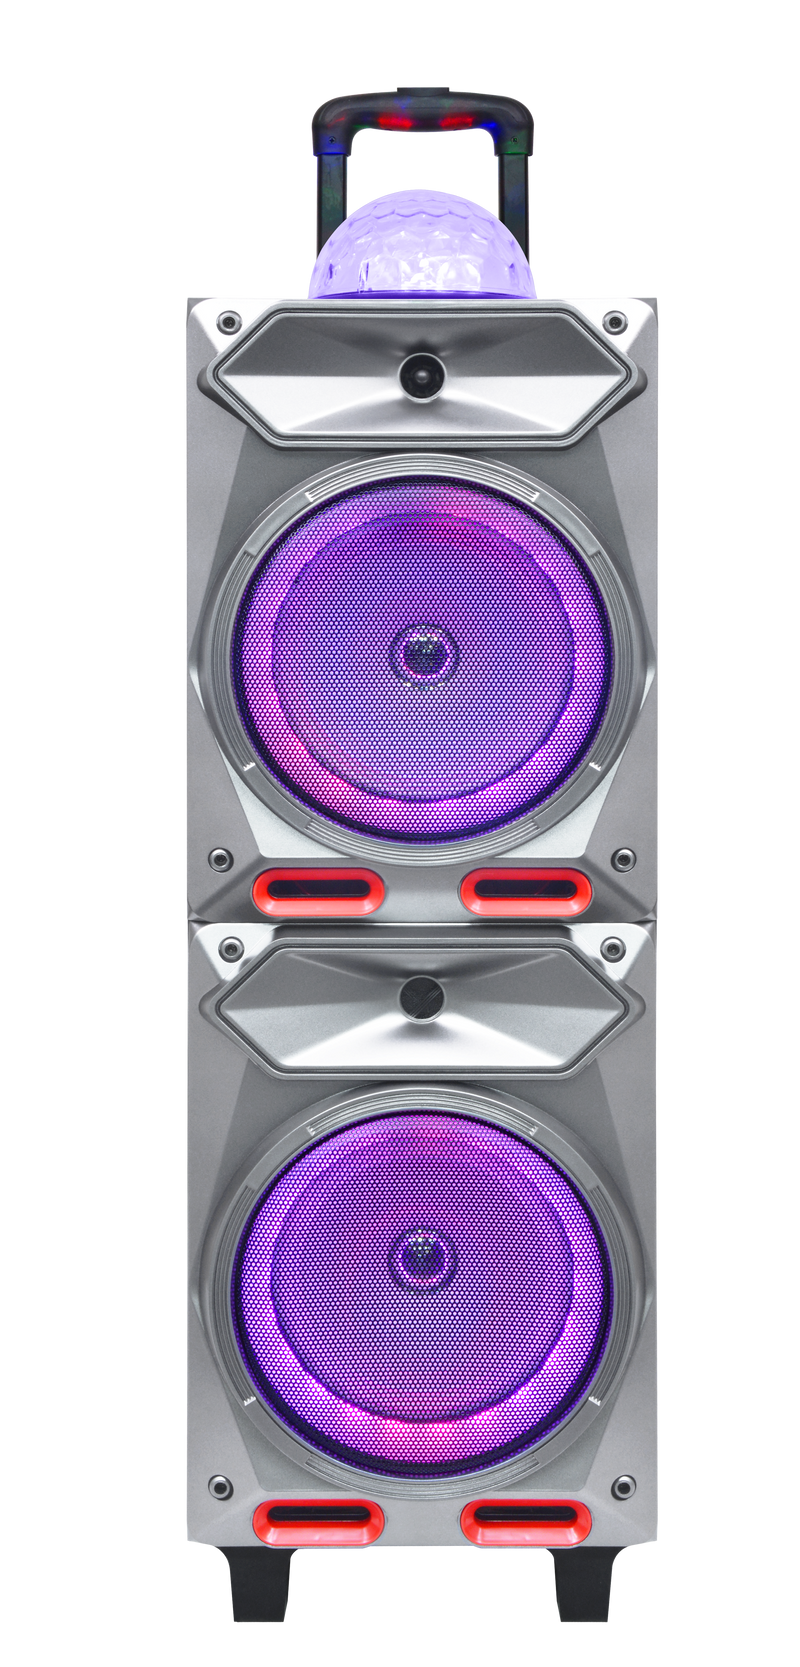 MAXPOWER MPD6207 8" X 2 Karaoke rechargeable speaker with LED dancing lights around the woofer, mic & remote